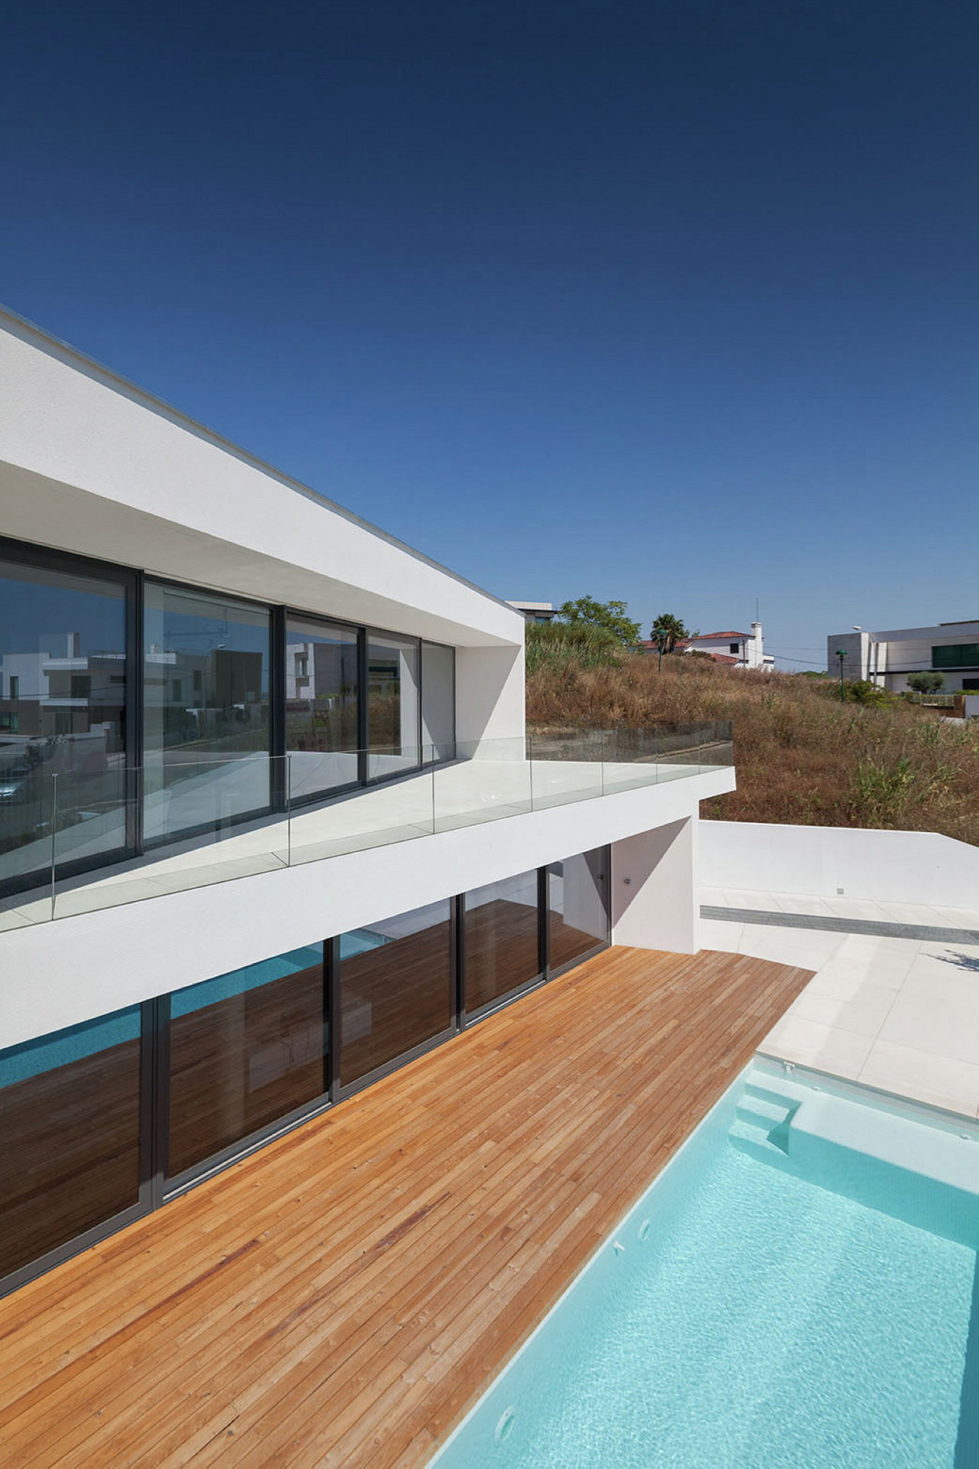 JC House Villa At The Suburb Of Lisbon, Portugal, Upon The Project Of JPS Atelier 11